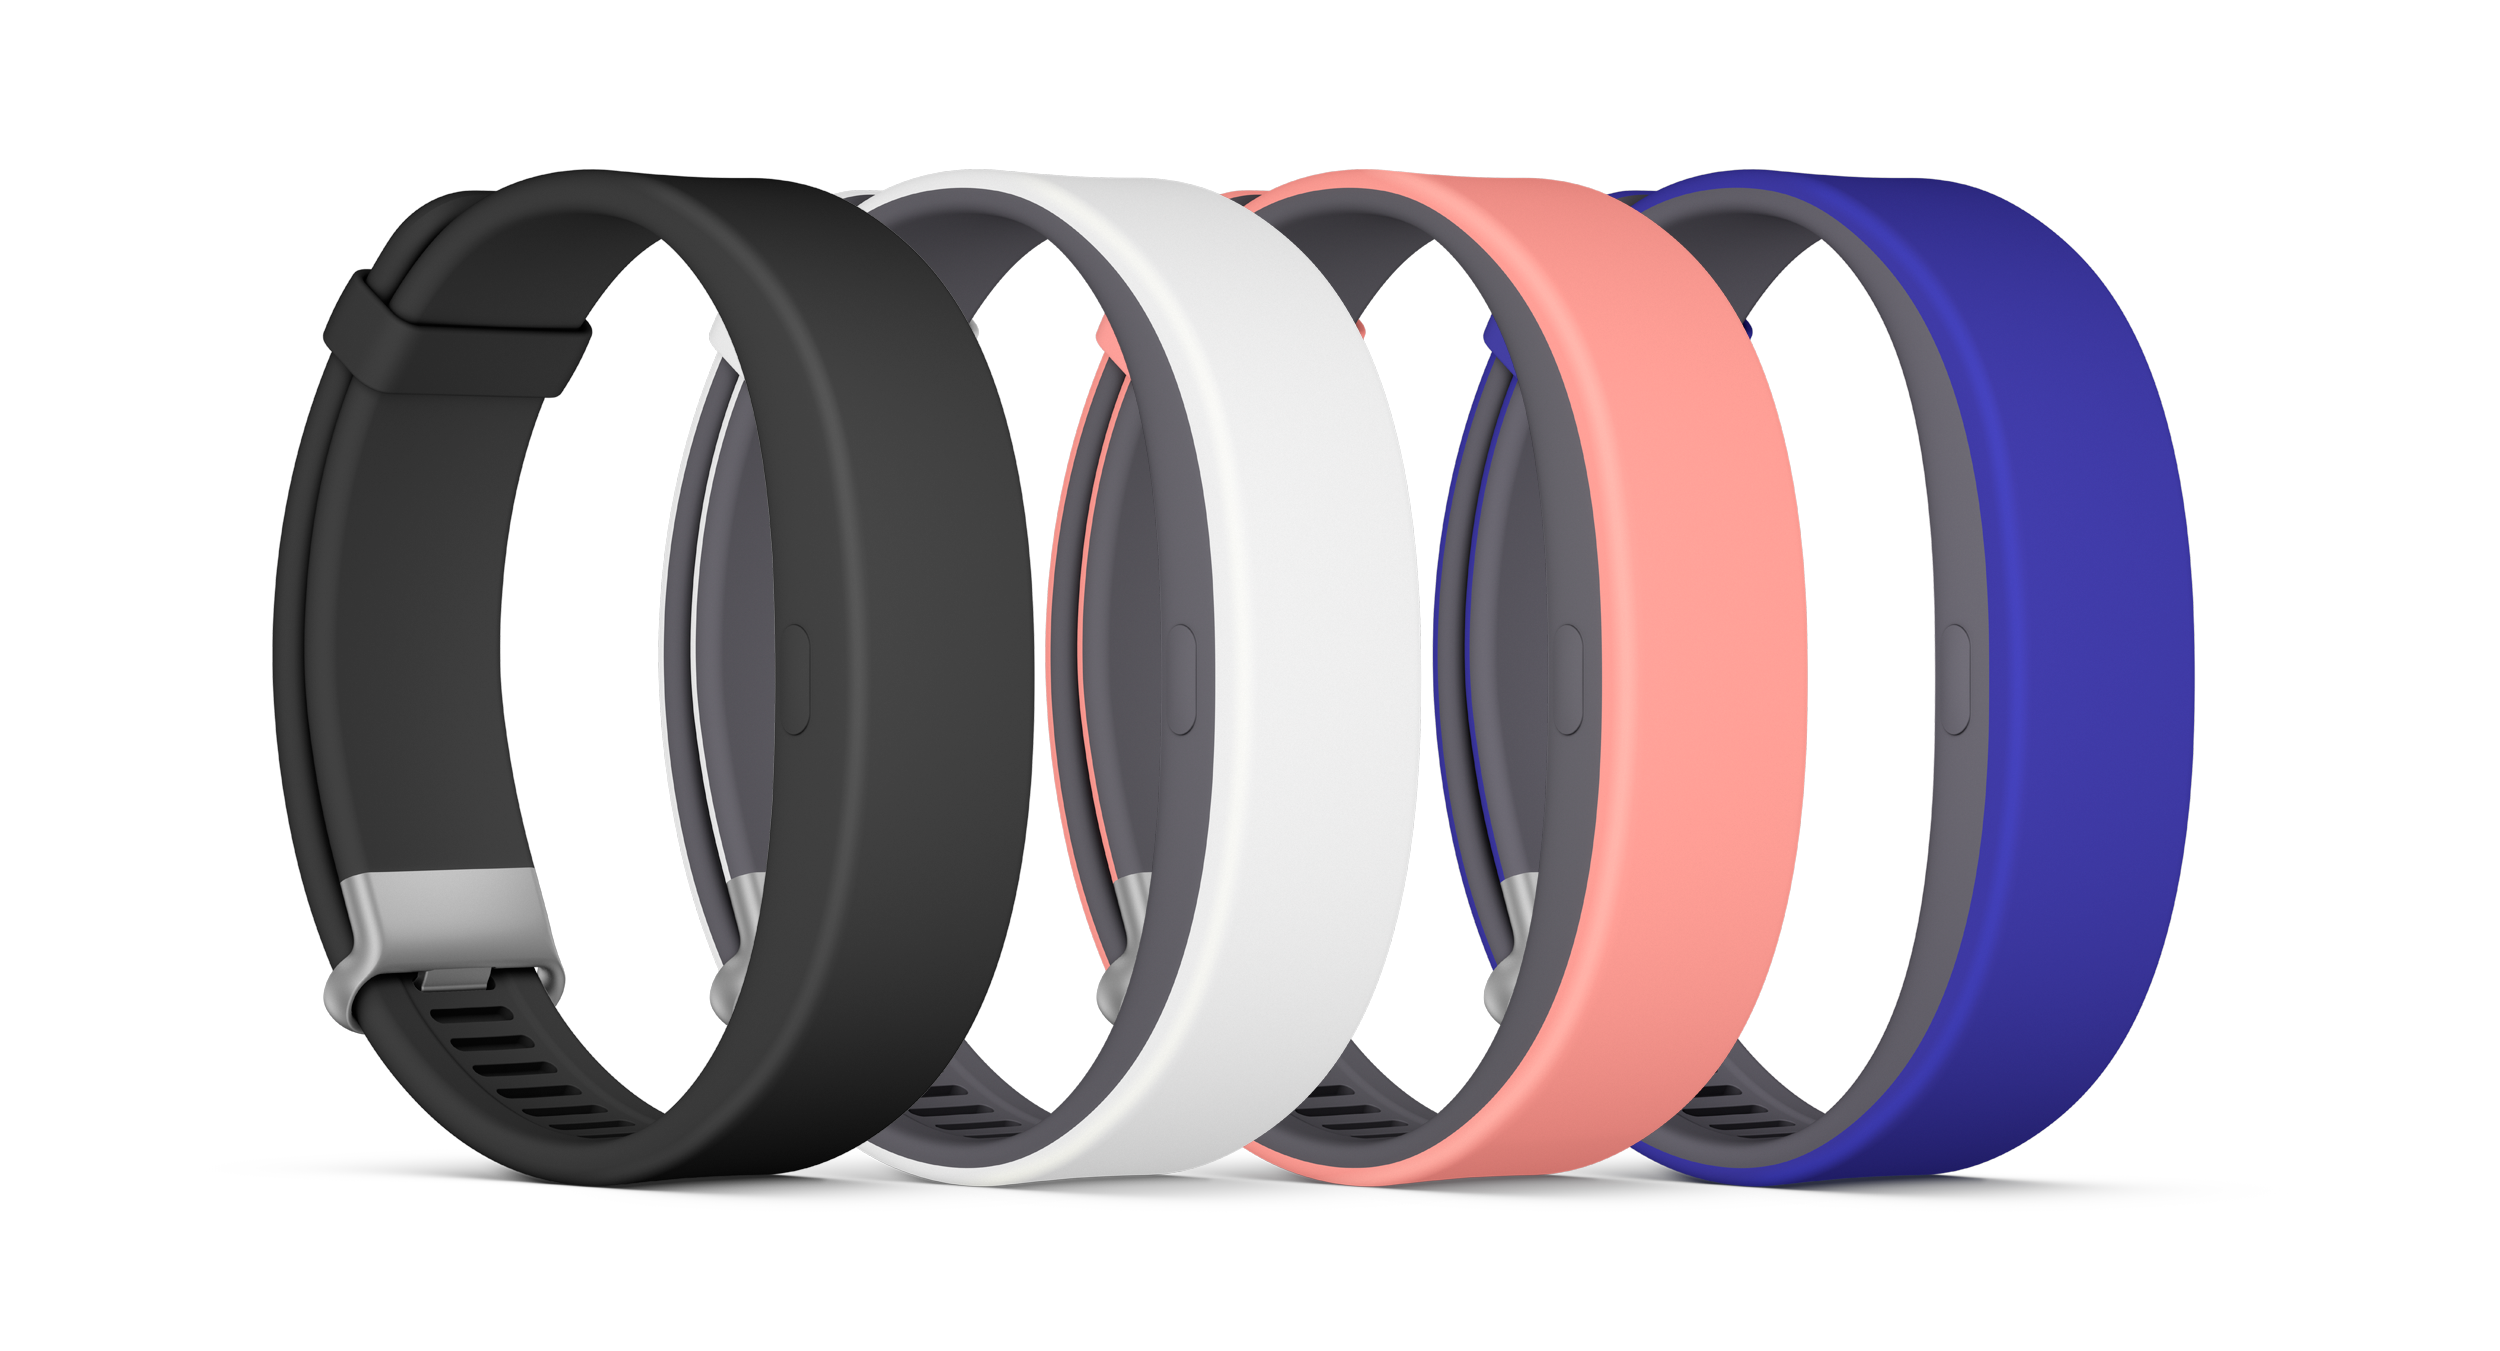 Sony SmartBand 2 goes official: fitness and sleep tracker equipped with heart rate sensor